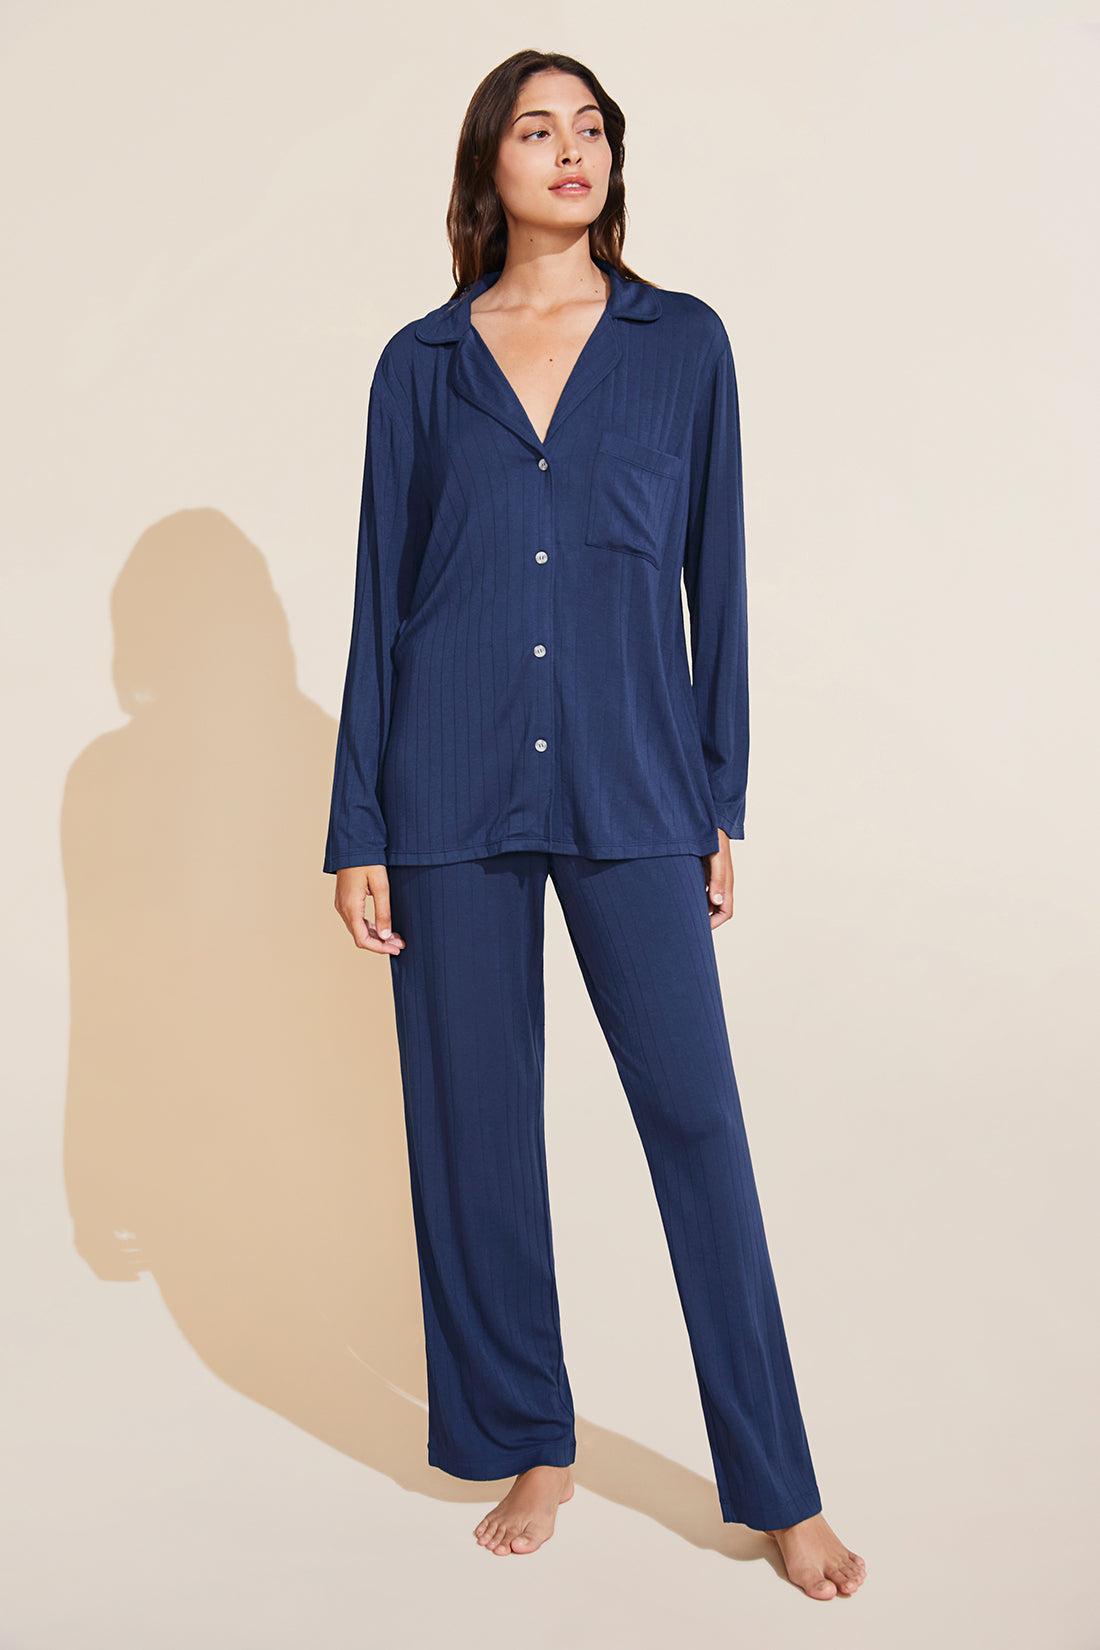 Shop a dupe of the Eberjey pajamas stars love at the Nordstrom